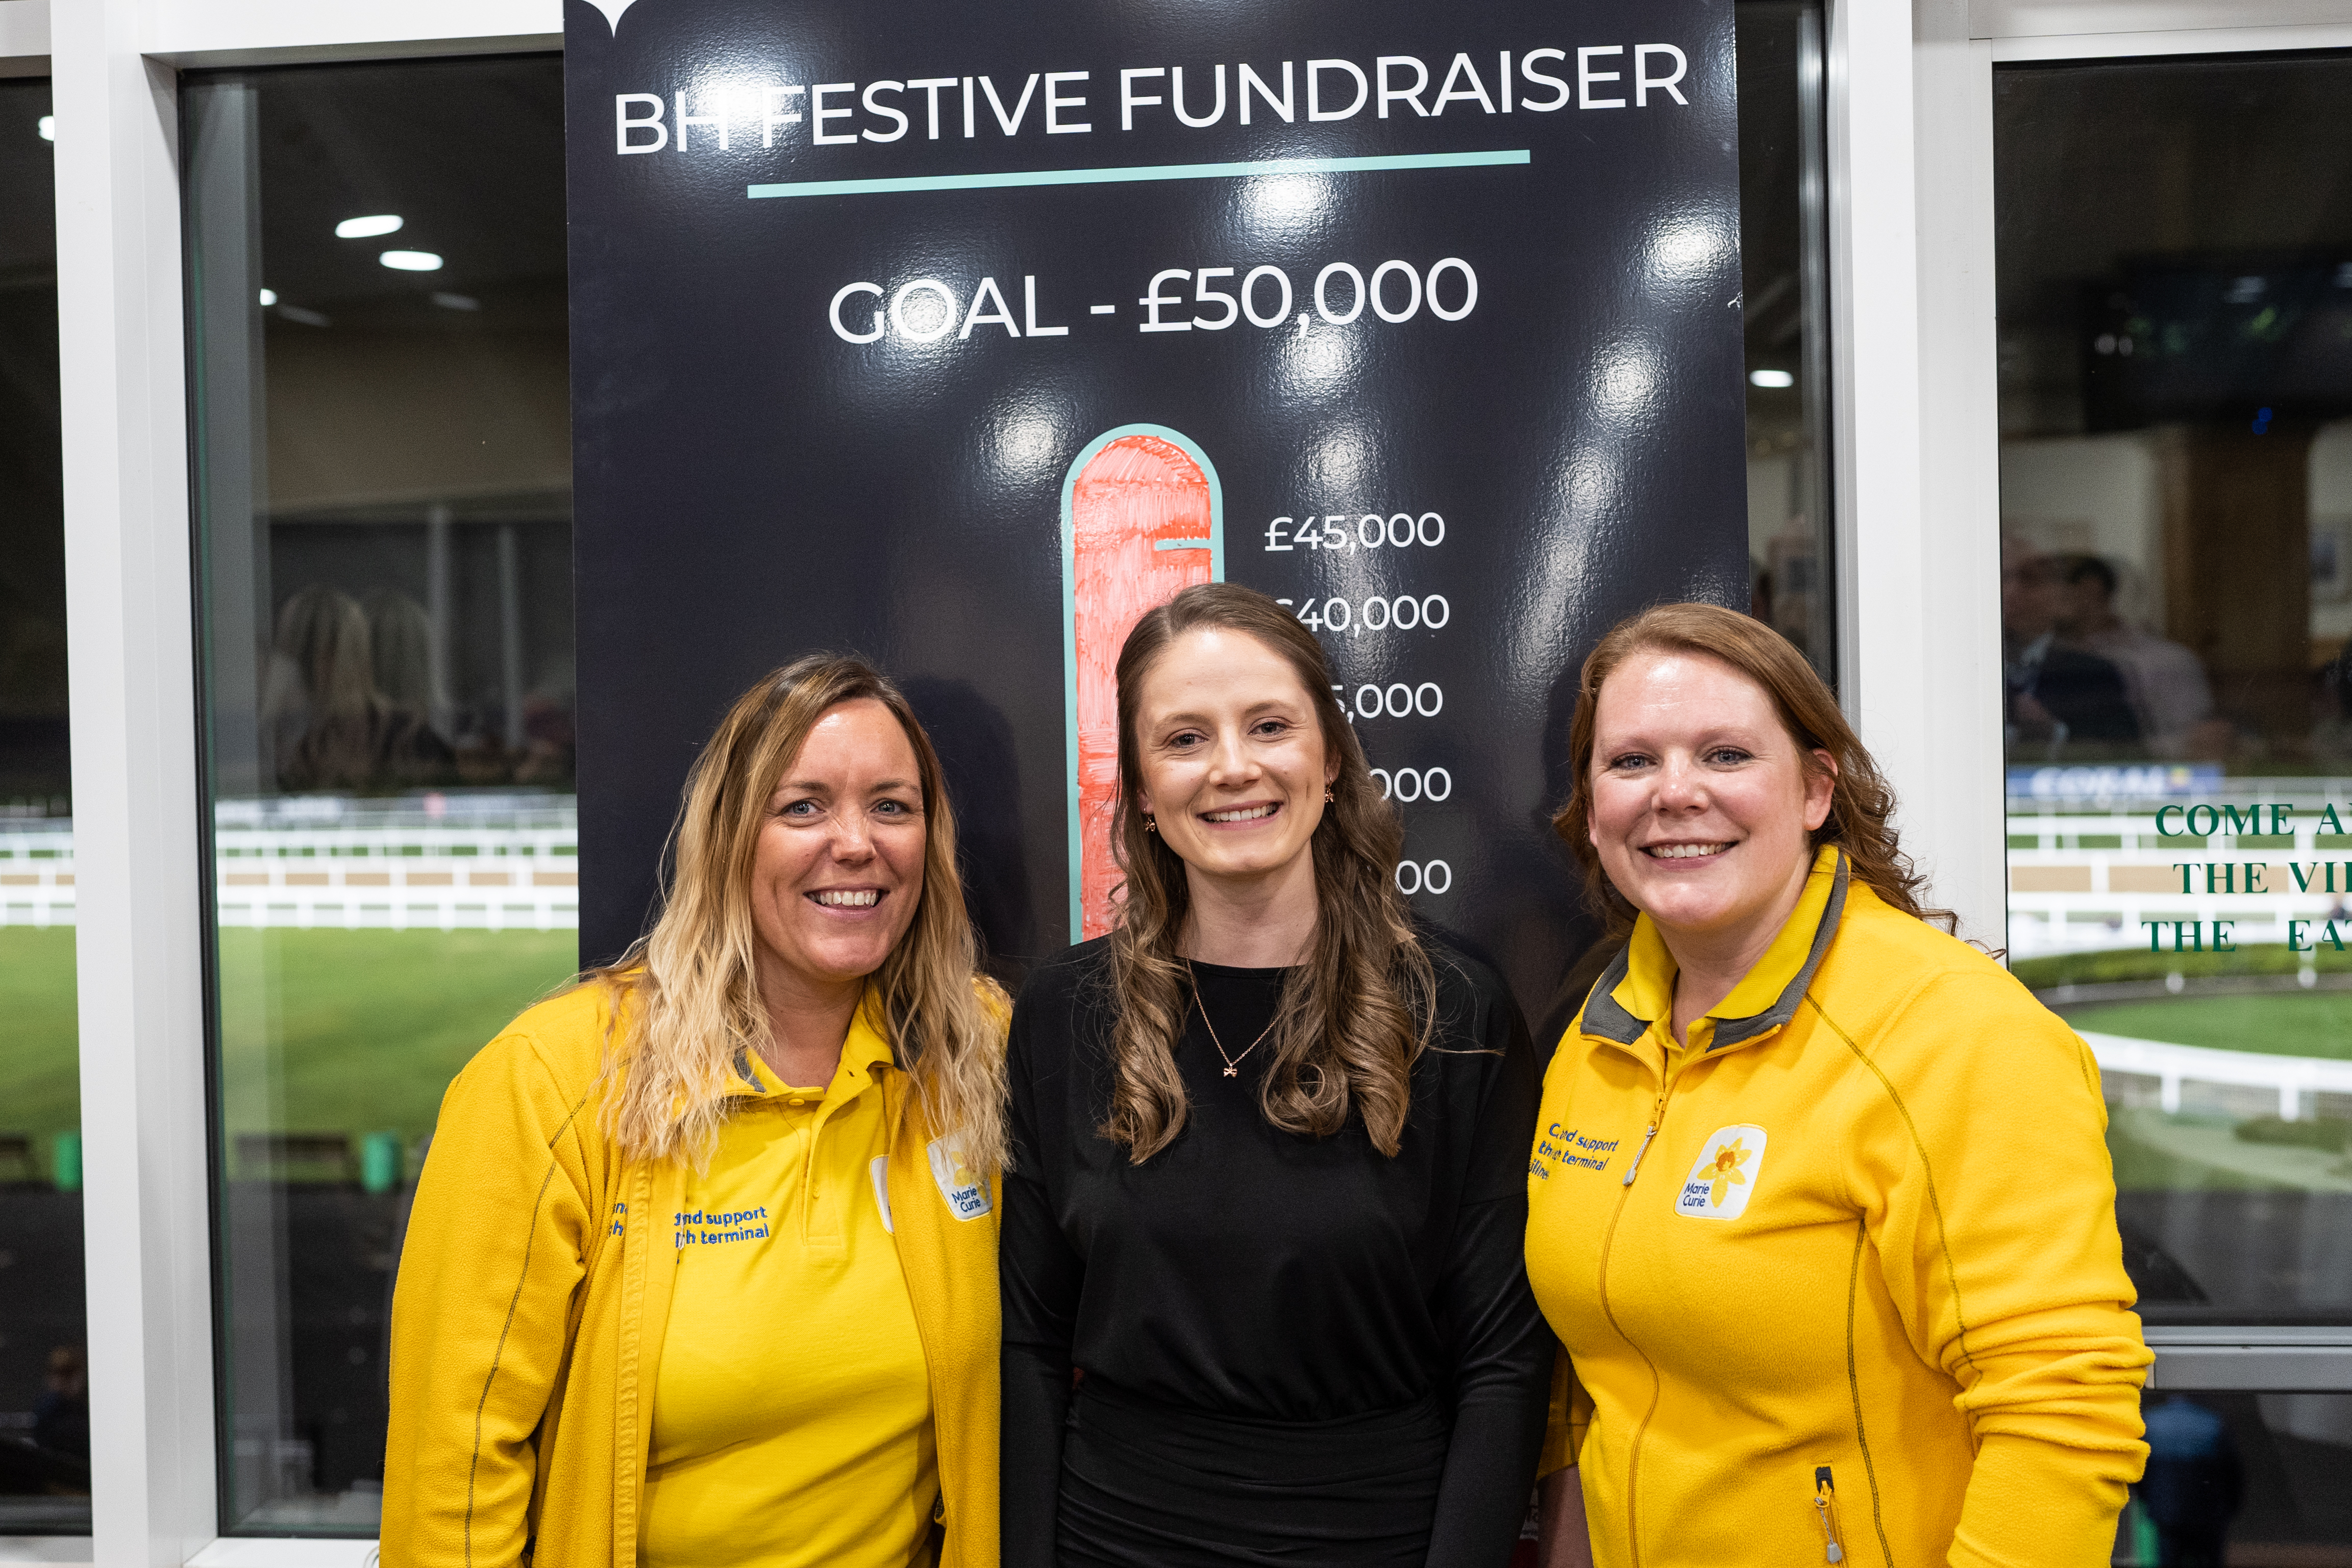 Head of Community Fundraising, North at Marie Curie., Kelly Knighting-Wykes, Jordan Bowler, PA and Office Manager at Bradley Hall and Deputy Head of Fundraising North and Yorkshire at Marie Curie Hayley Revell.jpg